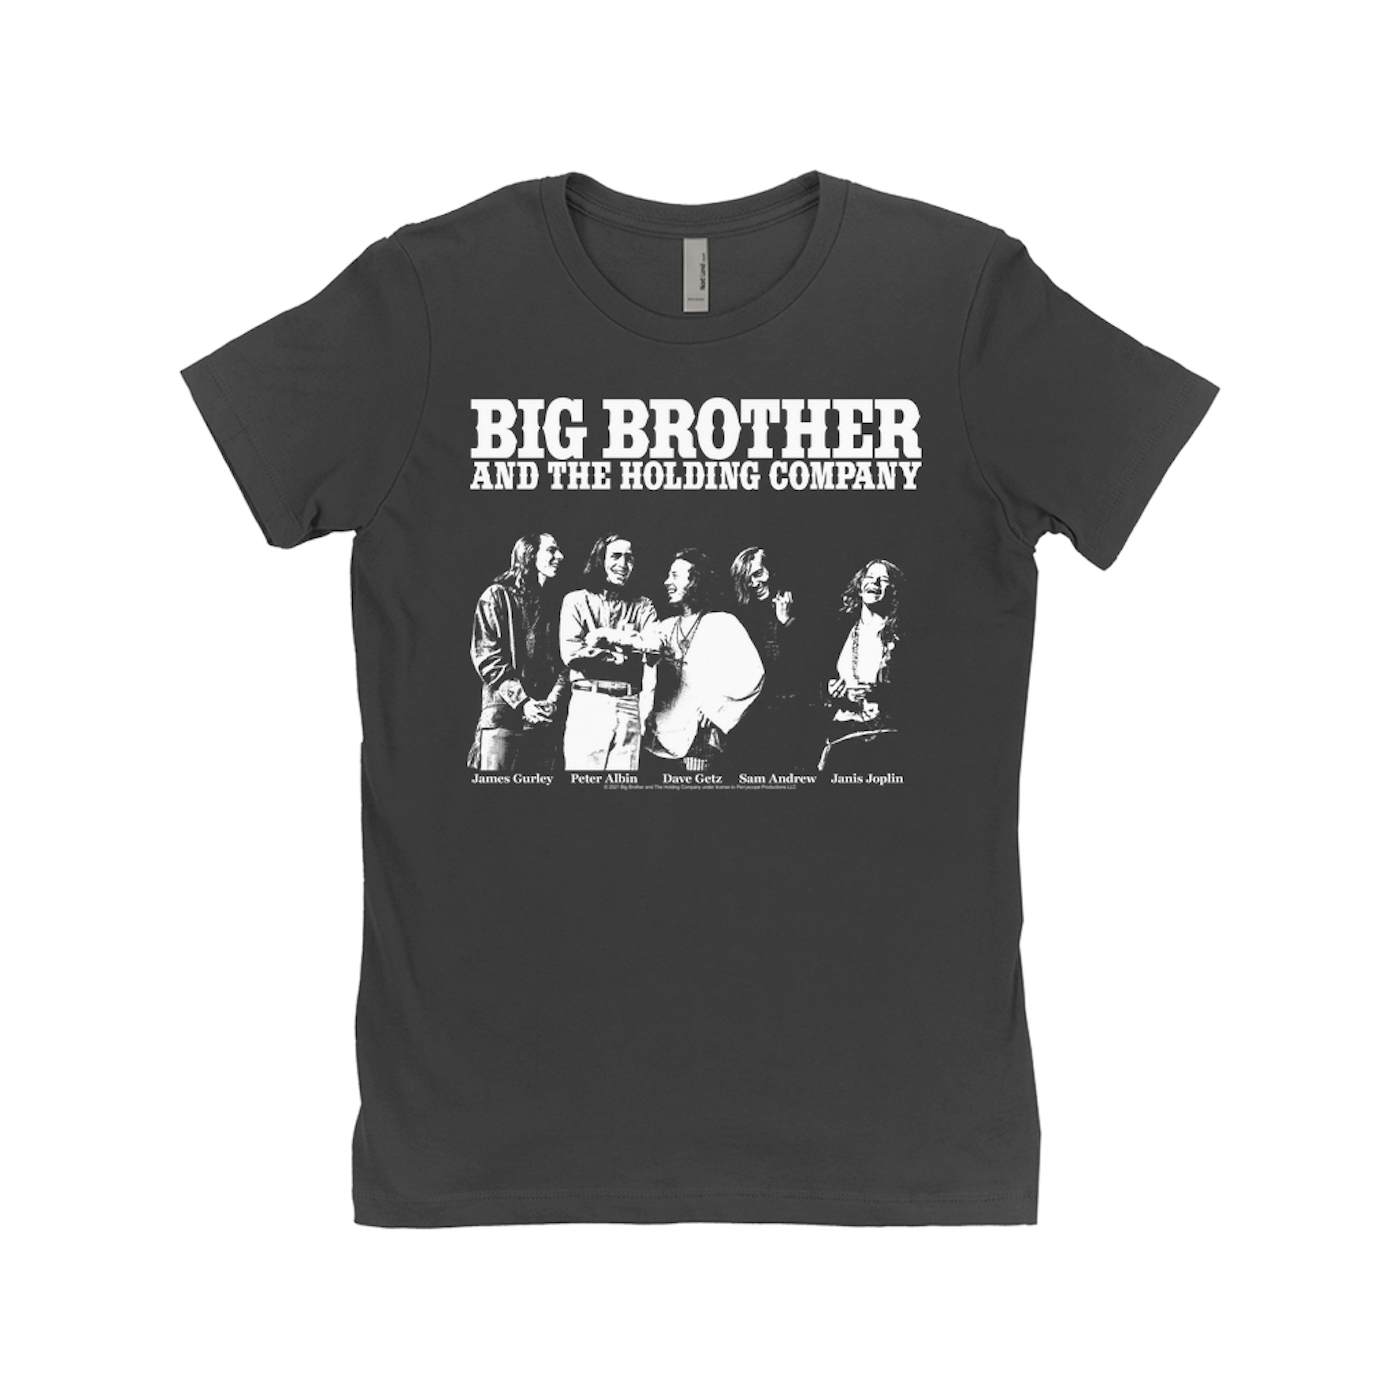 Big Brother & The Holding Company Big Brother and The Holding Co. Ladies' Boyfriend T-Shirt | Featuring Janis Joplin Black and White Photo Big Brother and The Holding Co. Shirt (Merchbar Exclusive)